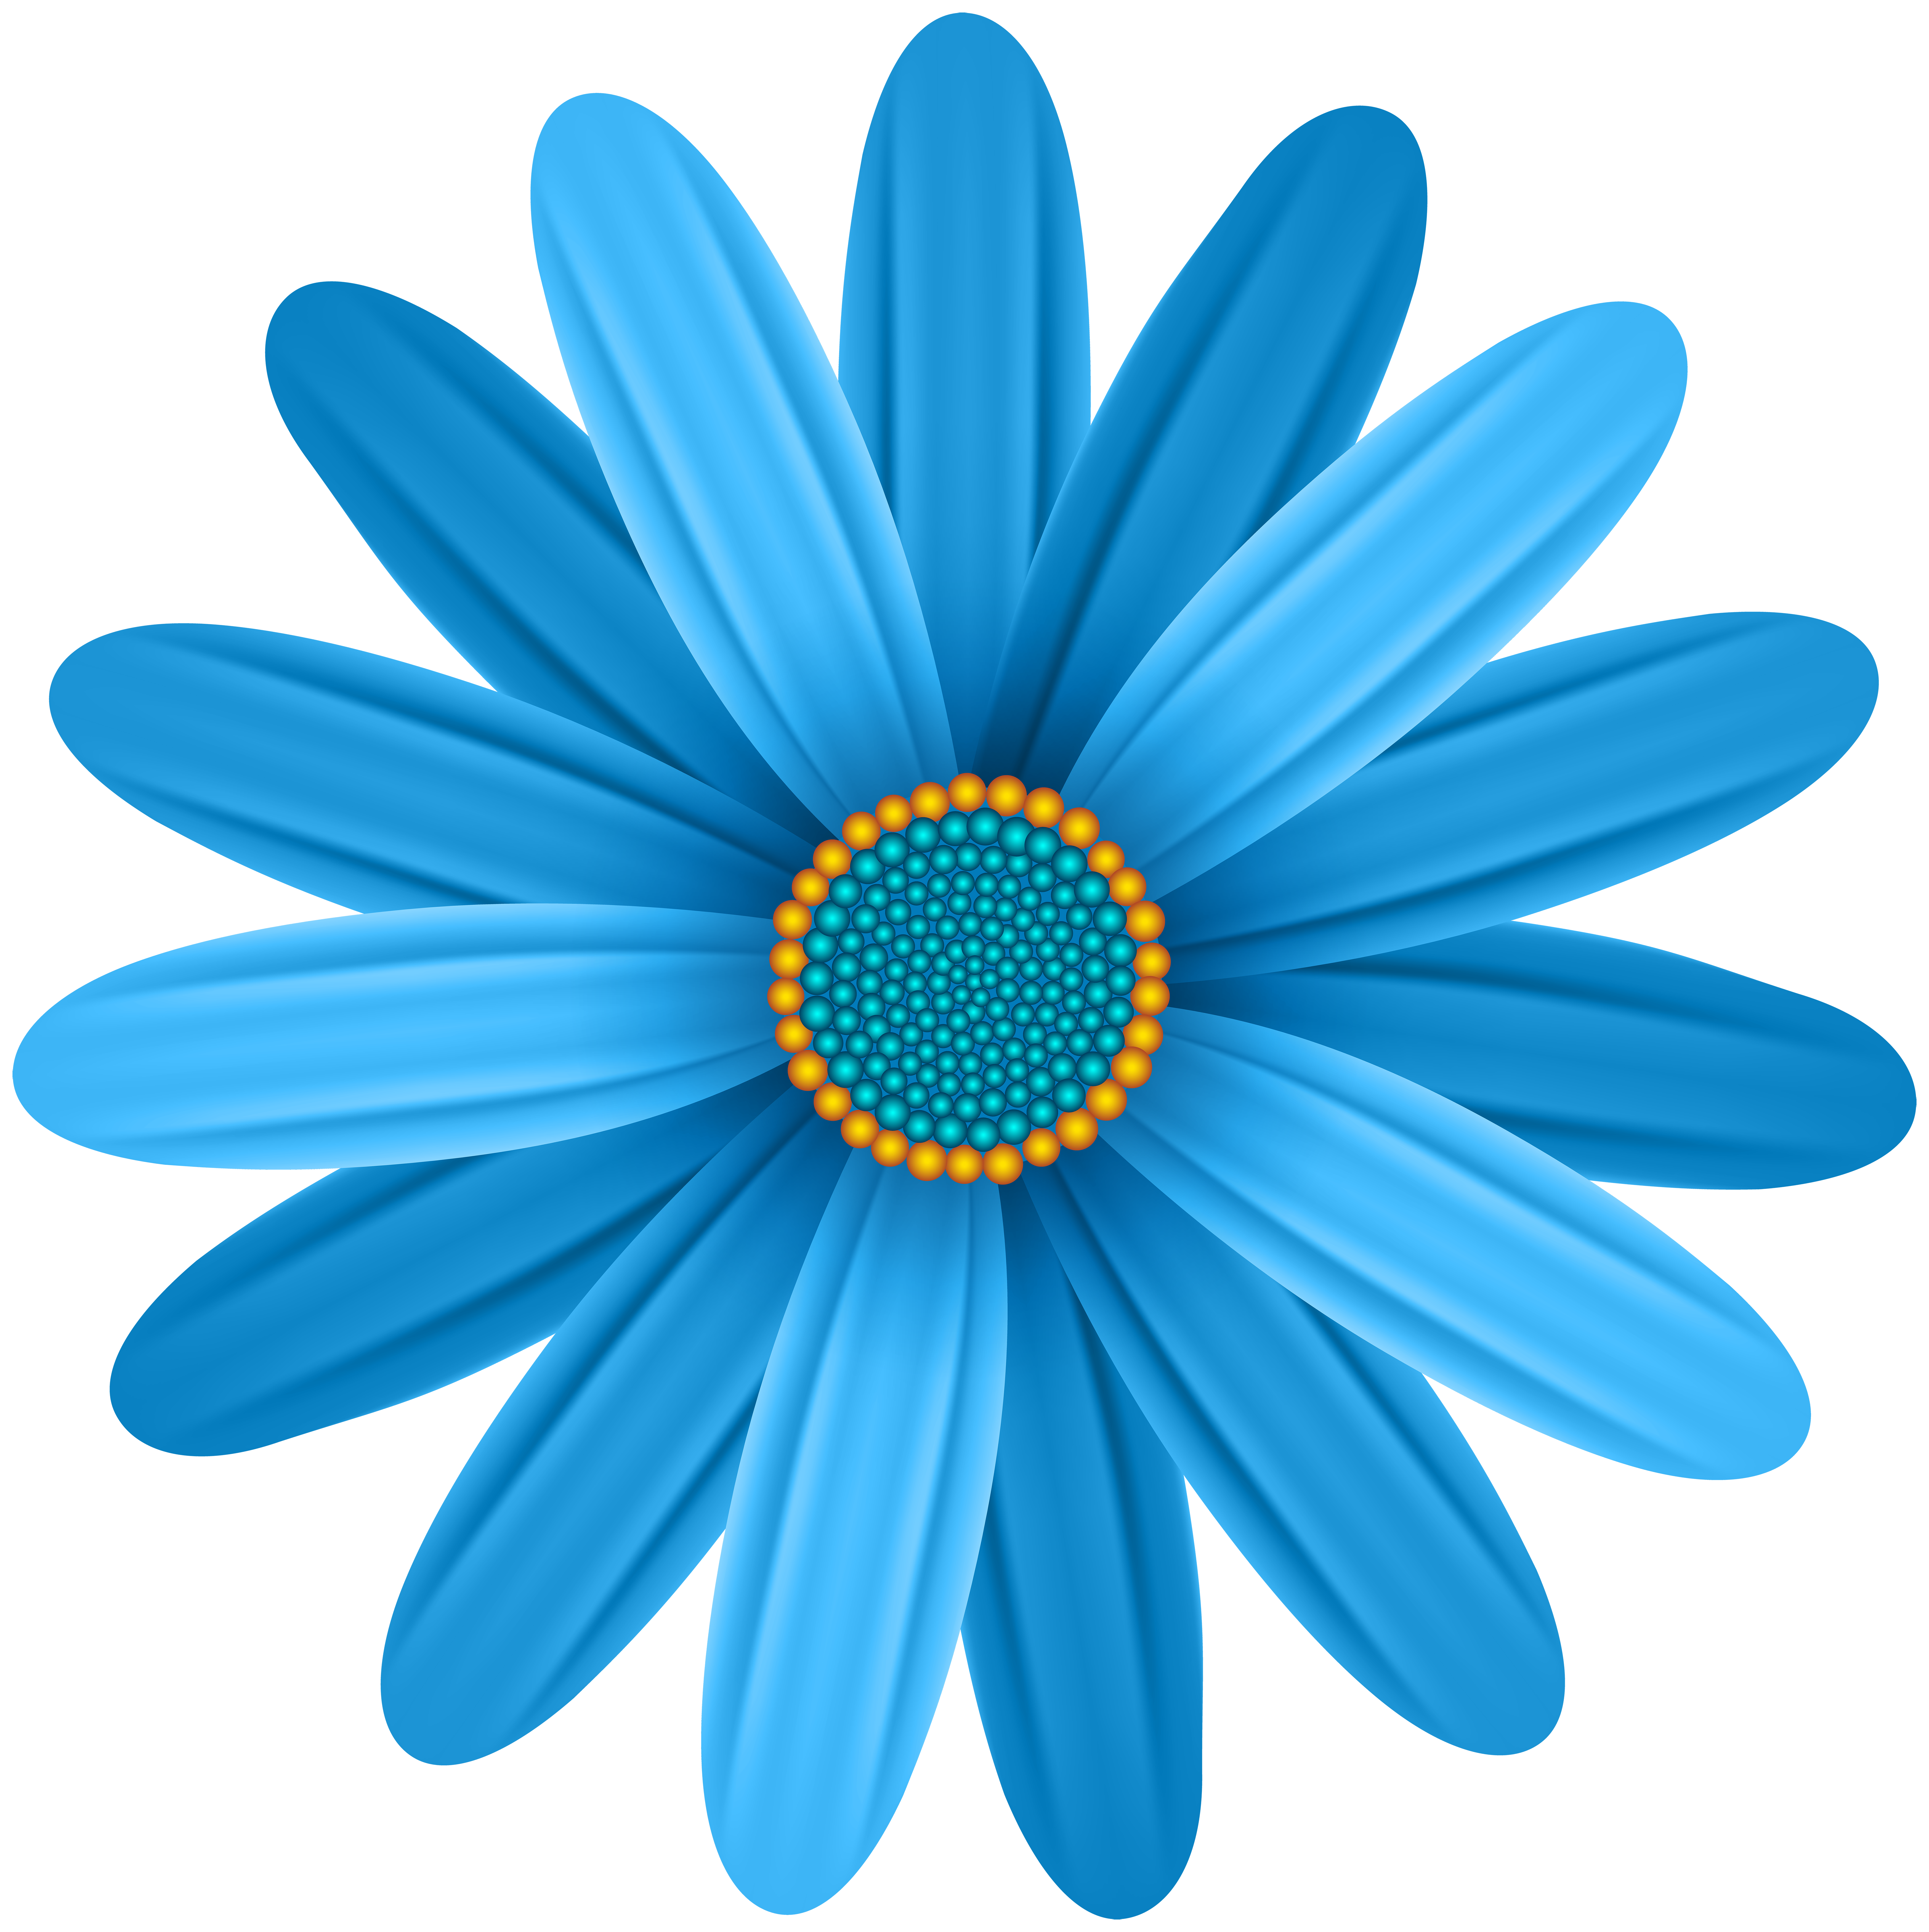 blue green flower clipart pictures